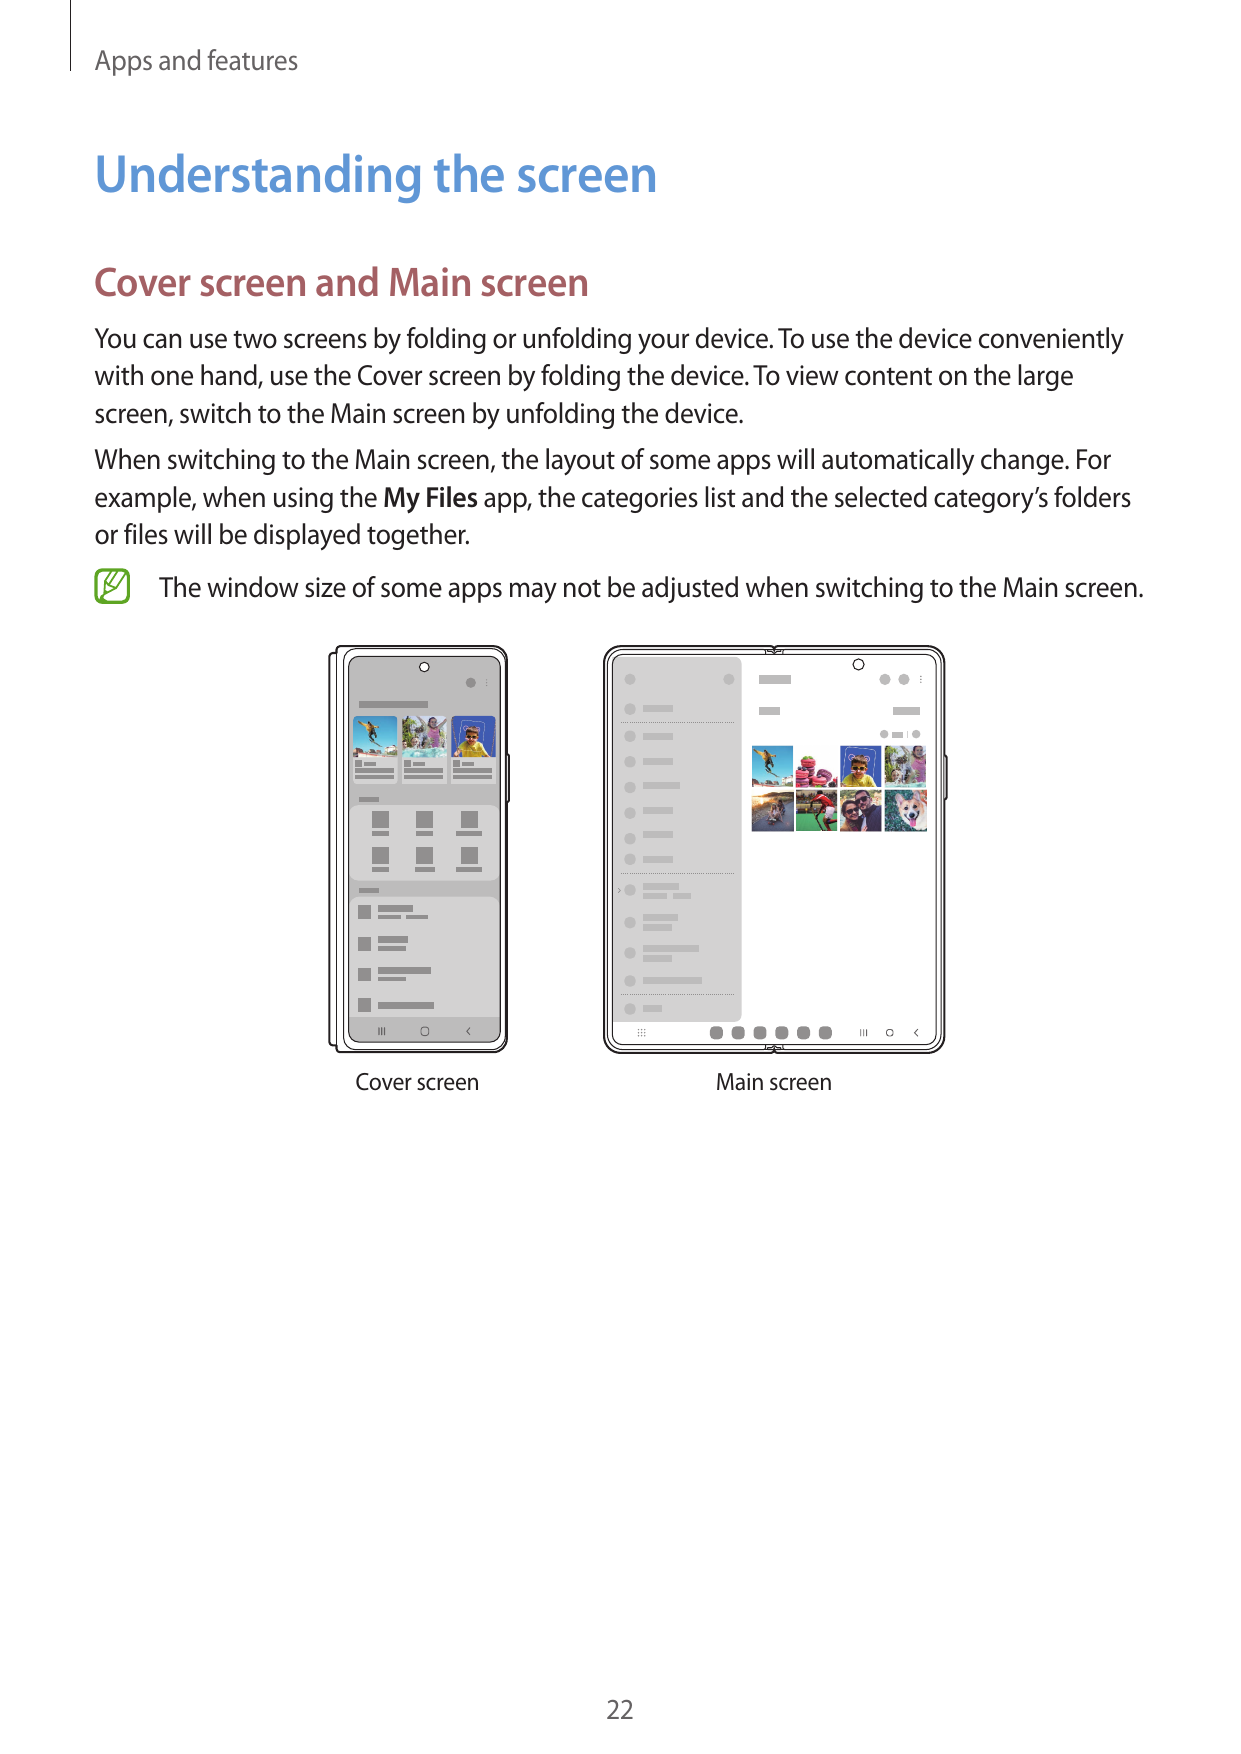 Apps and featuresUnderstanding the screenCover screen and Main screenYou can use two screens by folding or unfolding your device